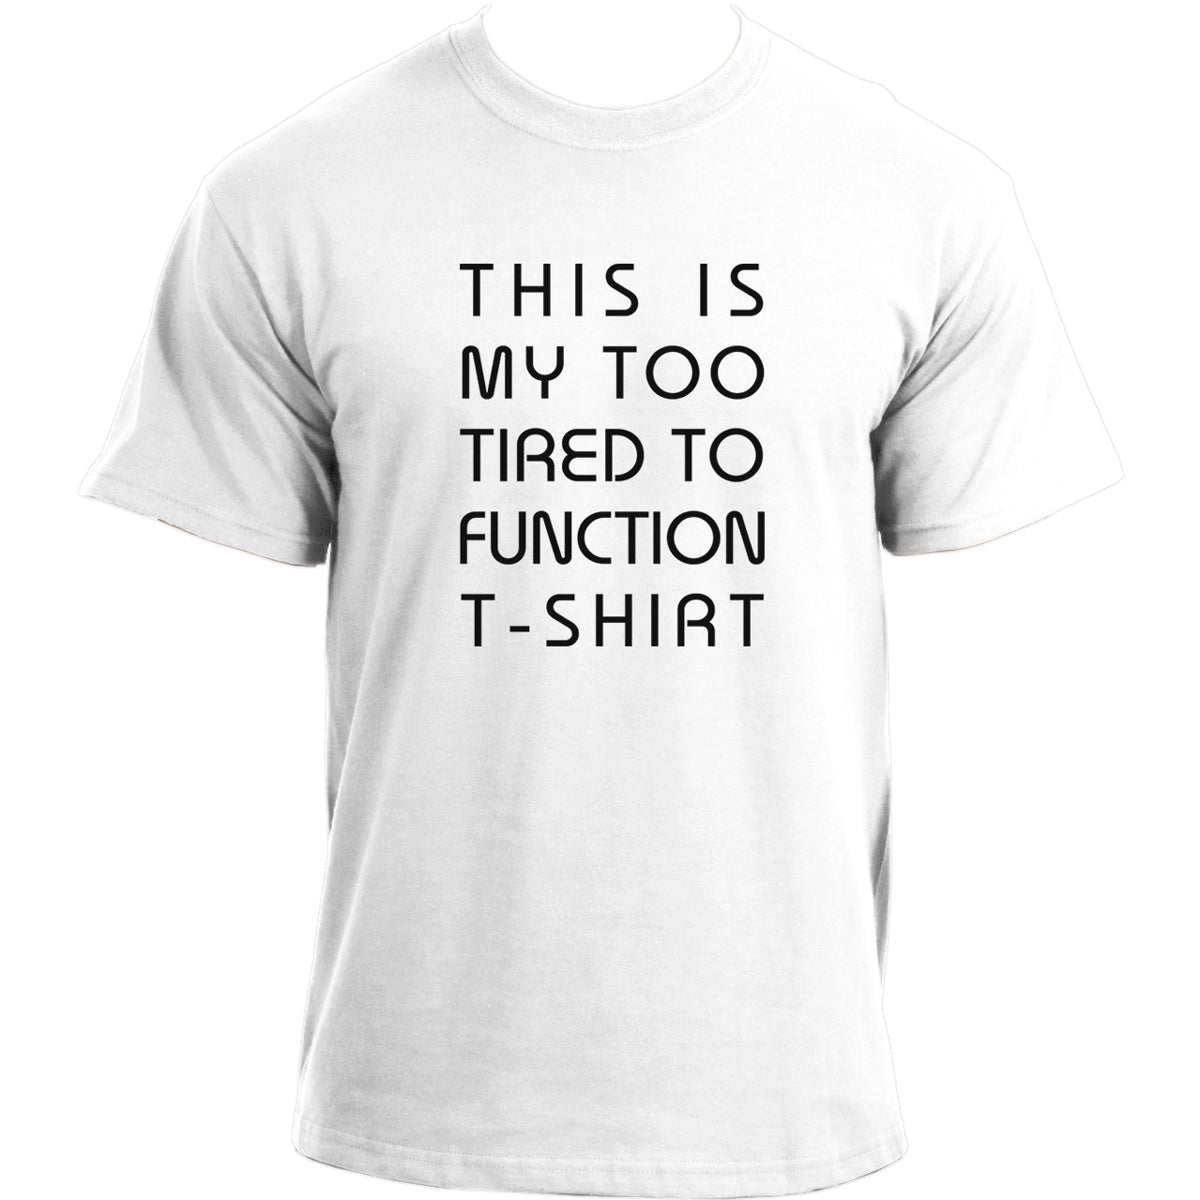 This Is My Too Tired To Function T-shirt I Sarcastic Top Novelty Funny T-shirt For Men